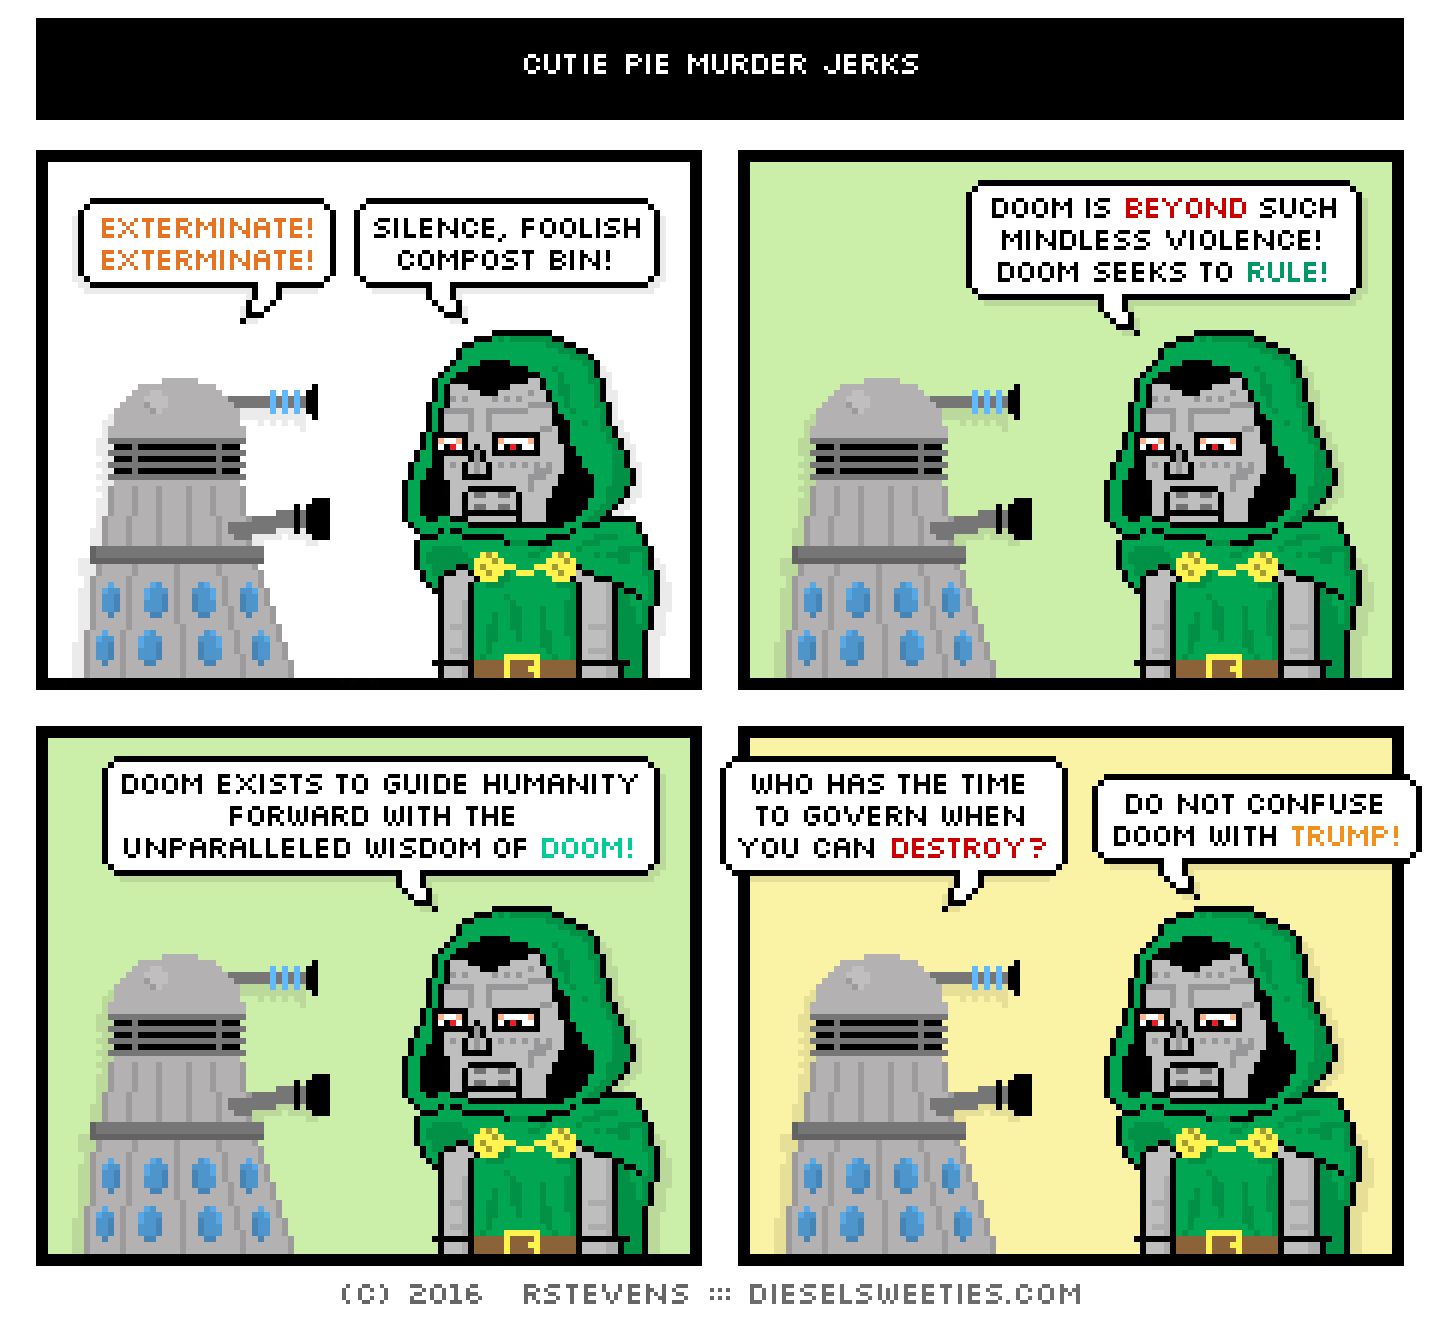 dalek, doctor doom : exterminate! exterminate! silence, foolish compost bin! doom is beyond such mindless violence! doom seeks to rule! doom exists to guide humanity forward with the unparalleled wisdom of doom! who has the time to govern when you can destroy? do not confuse doom with trump!